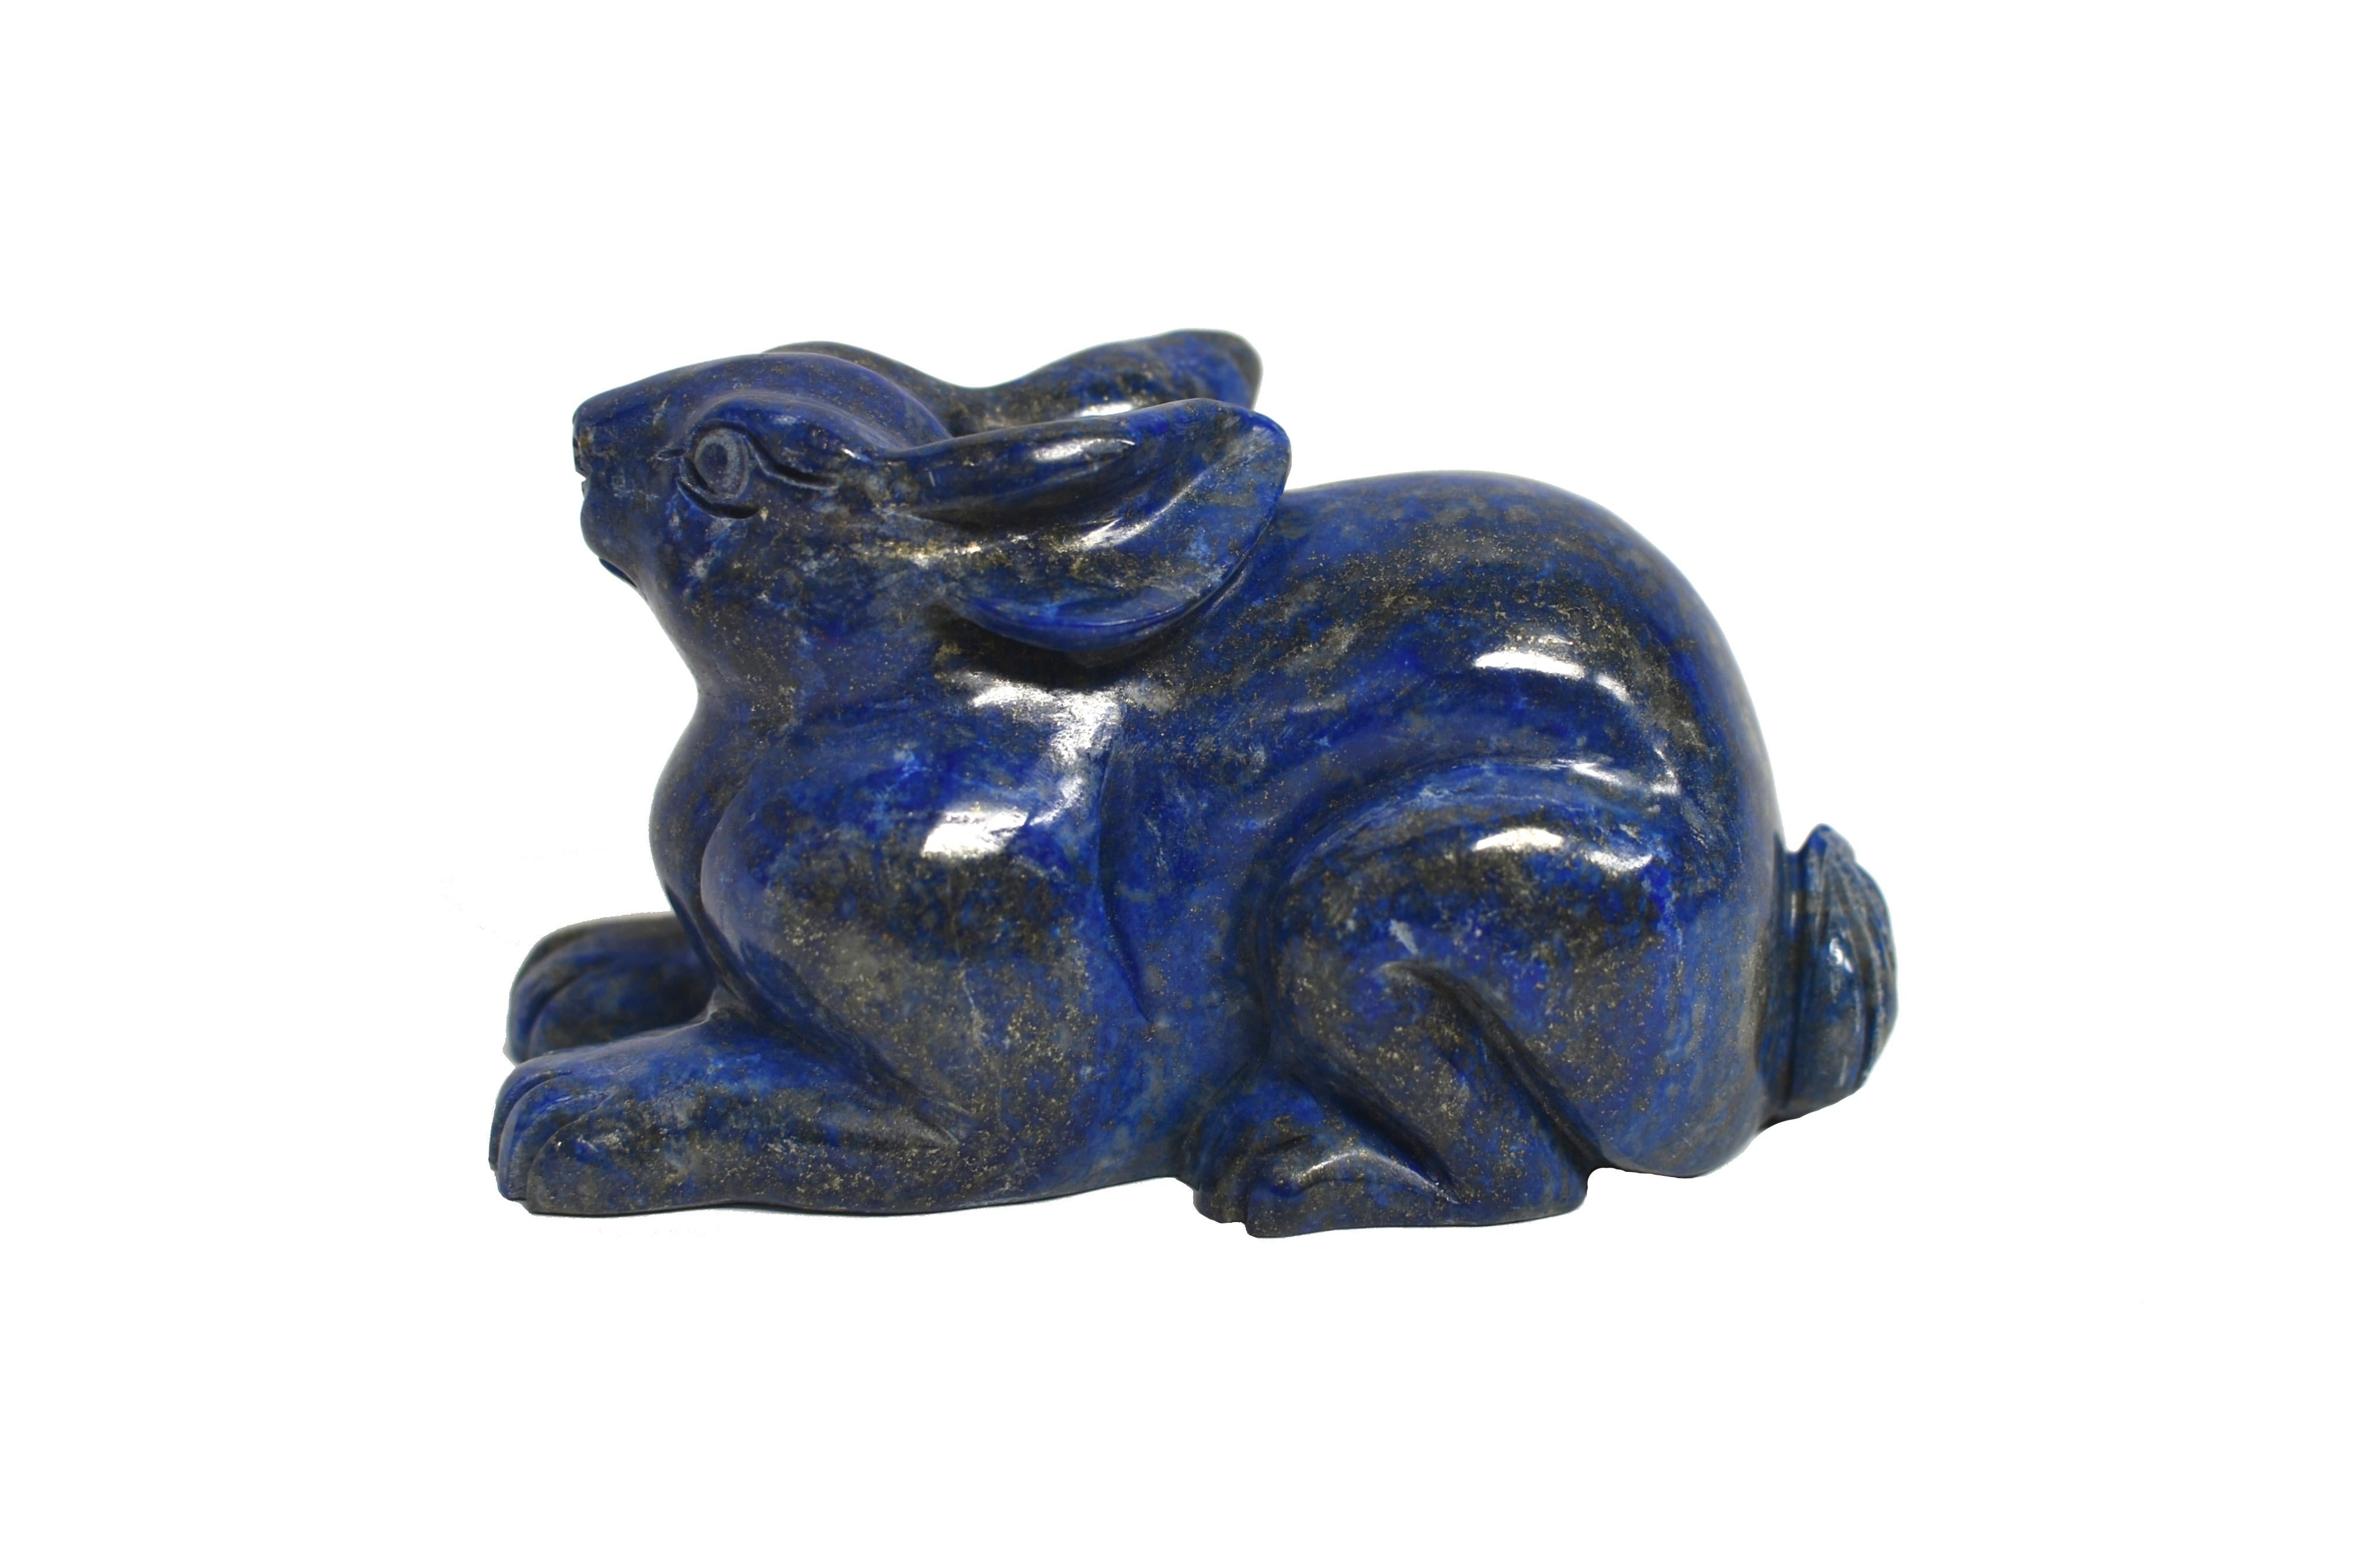 For the Year of the Rabbit we present a finely carved grade AAA finest natural lapis lazuli rabbit. The rabbit rests on his paws with ears pulled back. With alert and inquisitive expression. Lapis is of beautiful cobalt blue with golden speckles.